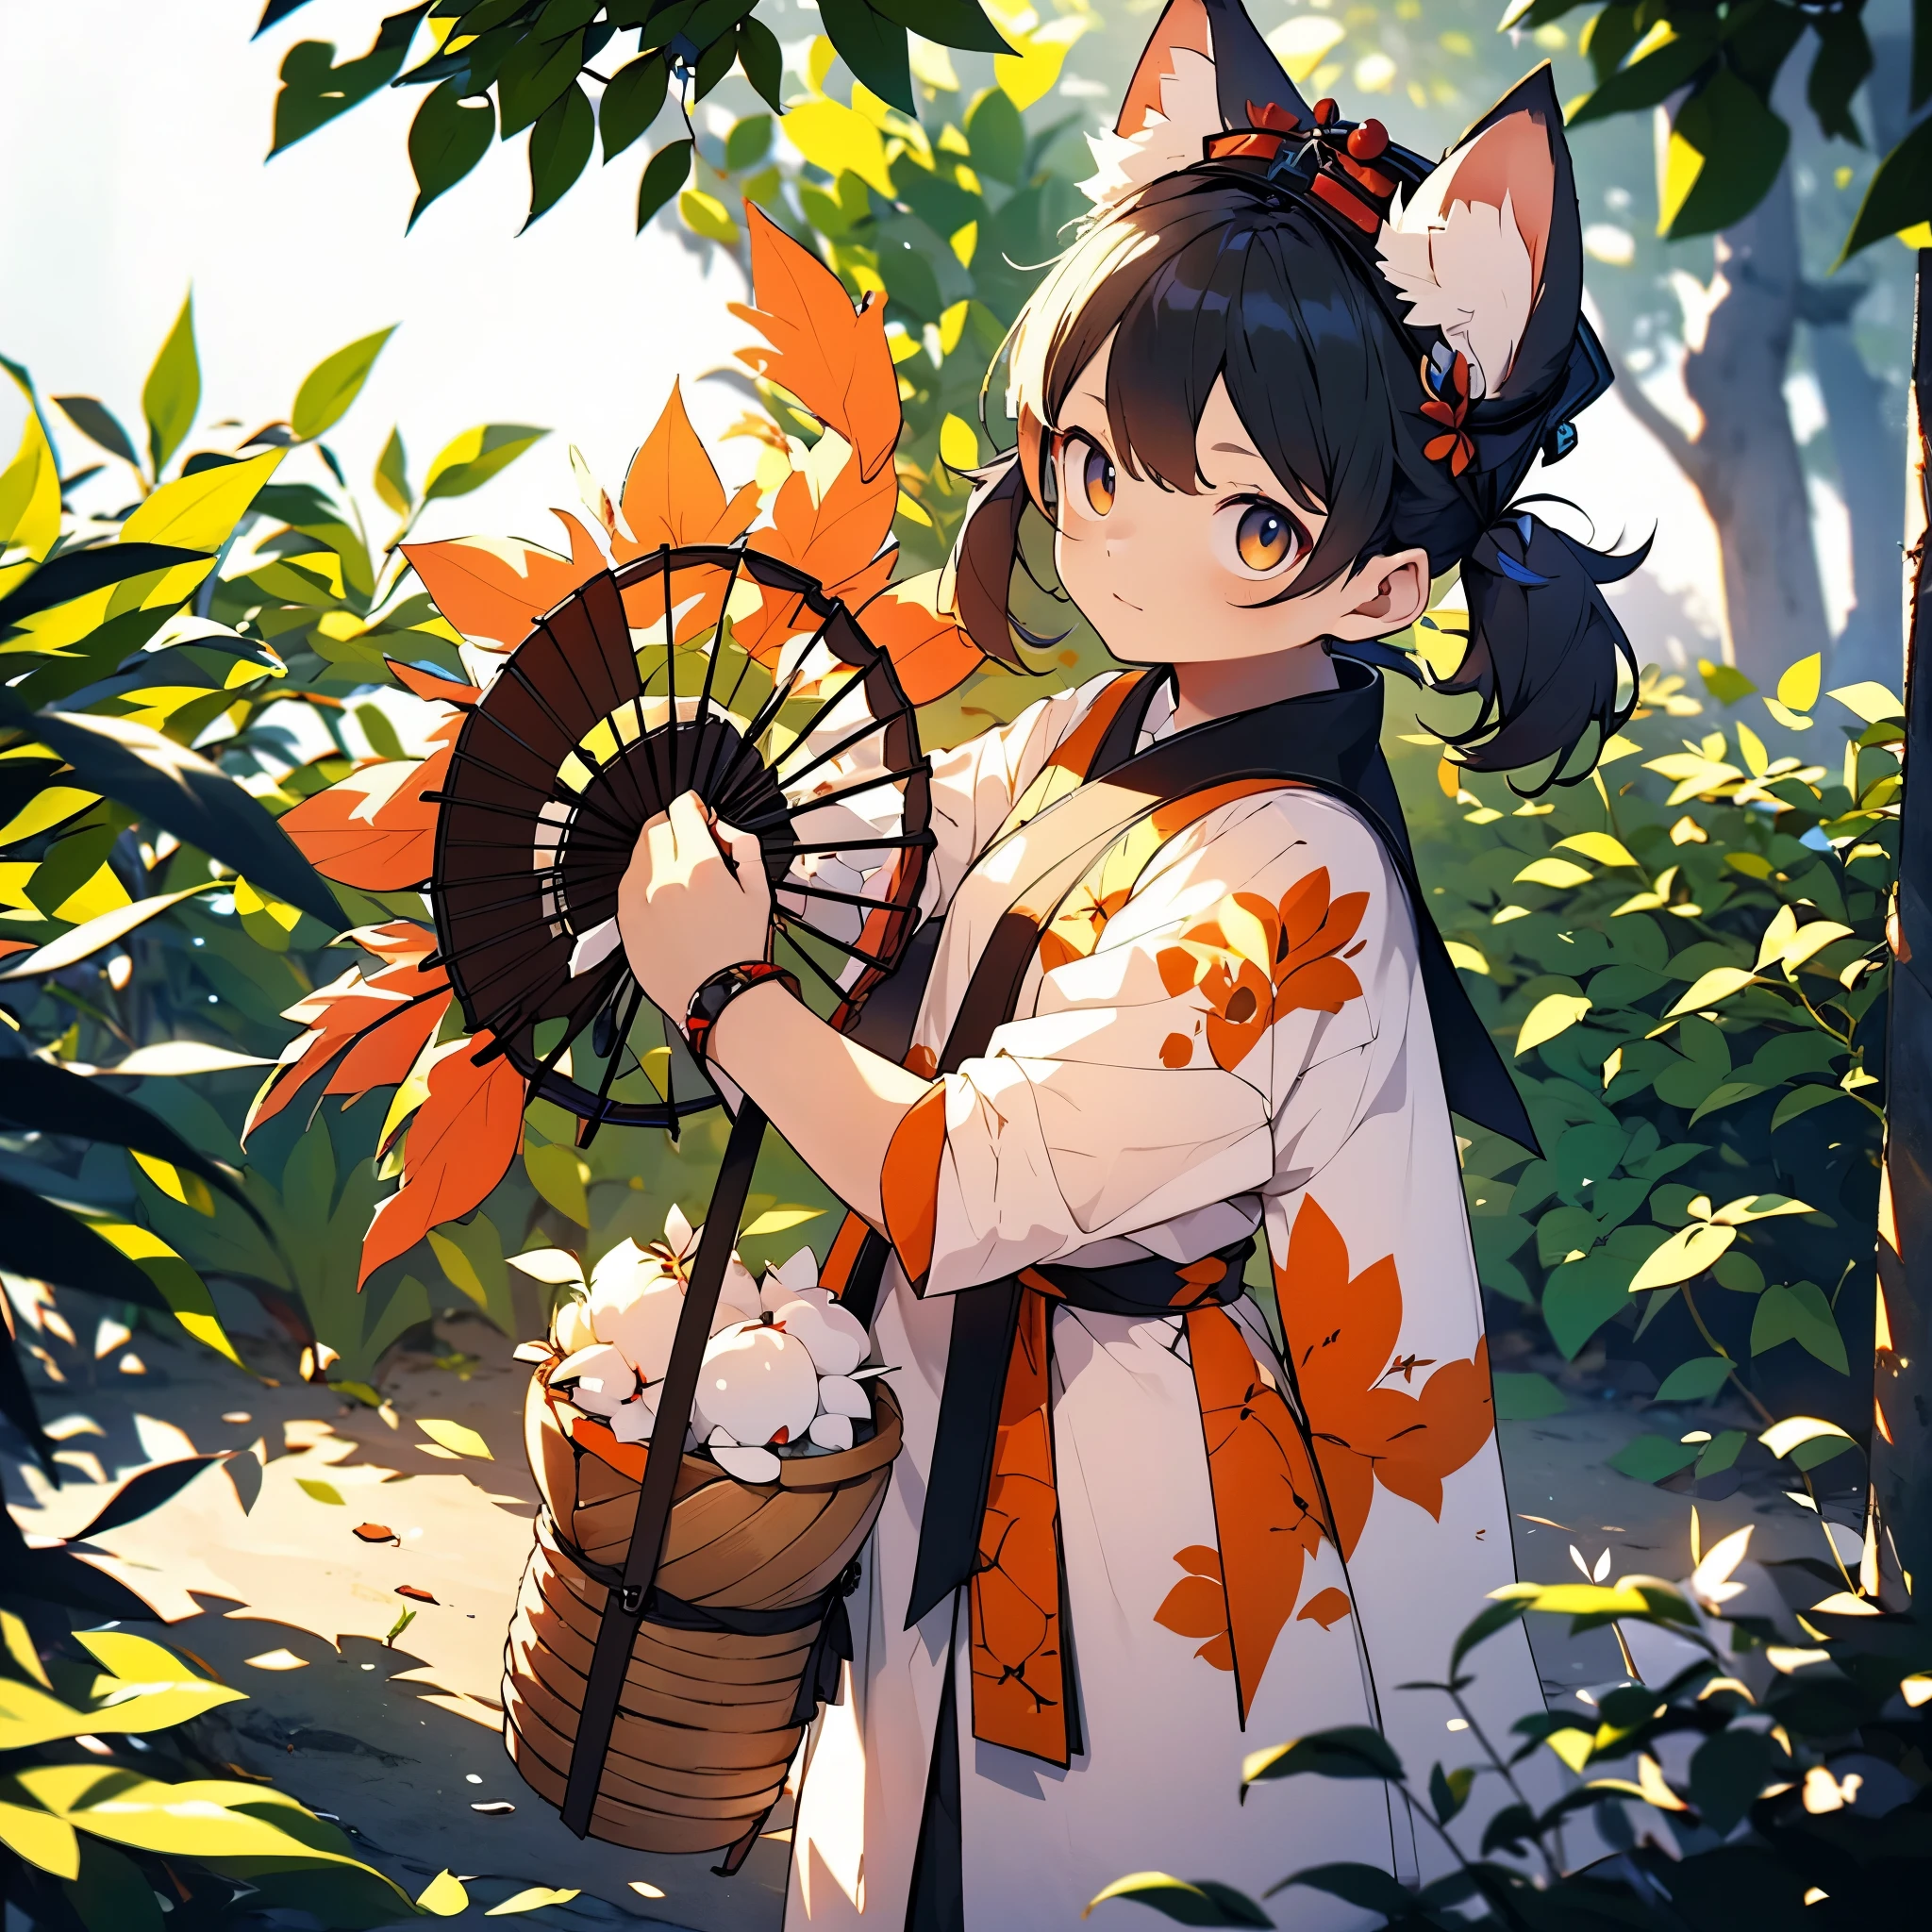 In a picturesque scene, a cute half-Fox spirit with white fur, adorned with adorable animal ears, has descended to the mortal realm. This lovable creature possesses traits that include being coy and mischievous. With nine magnificent tails swaying gracefully behind her, she personifies both innocence and playfulness. To enhance her charm, she is dressed in traditional Chinese attire, and her head is adorned with a bell. In her hands, she carries either a long blade or an elegant folding fan, adding an air of elegance to her overall appearance. The quality of the image is of utmost importance, with a resolution of 4K or 8K and exceptional detail, making it a true masterpiece. The art style depicted should aim to capture her enchanting presence, using vibrant colors and a touch of photorealism. To complete the scene, gentle lighting beautifully illuminates the surroundings, emphasizing the alluring aura of this magical half-Fox spirit.